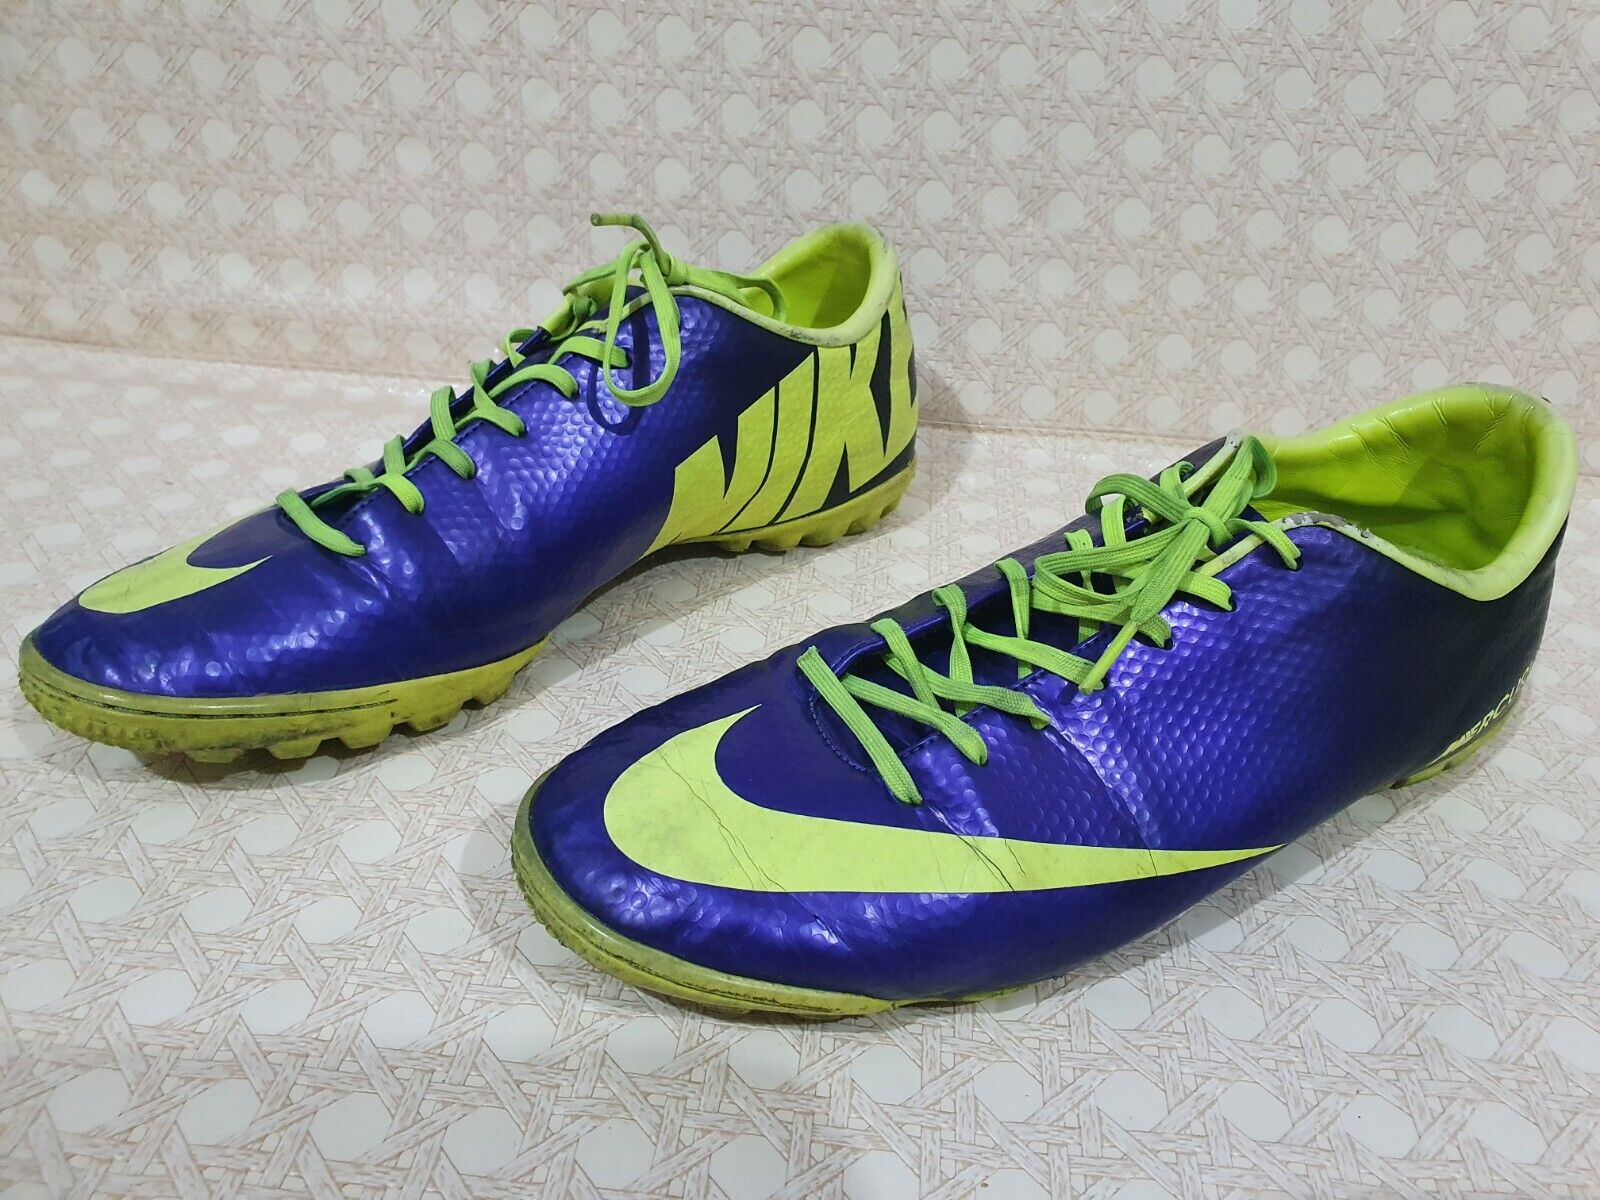 Nike Mercurial IV Astro Trainers Size 11 |